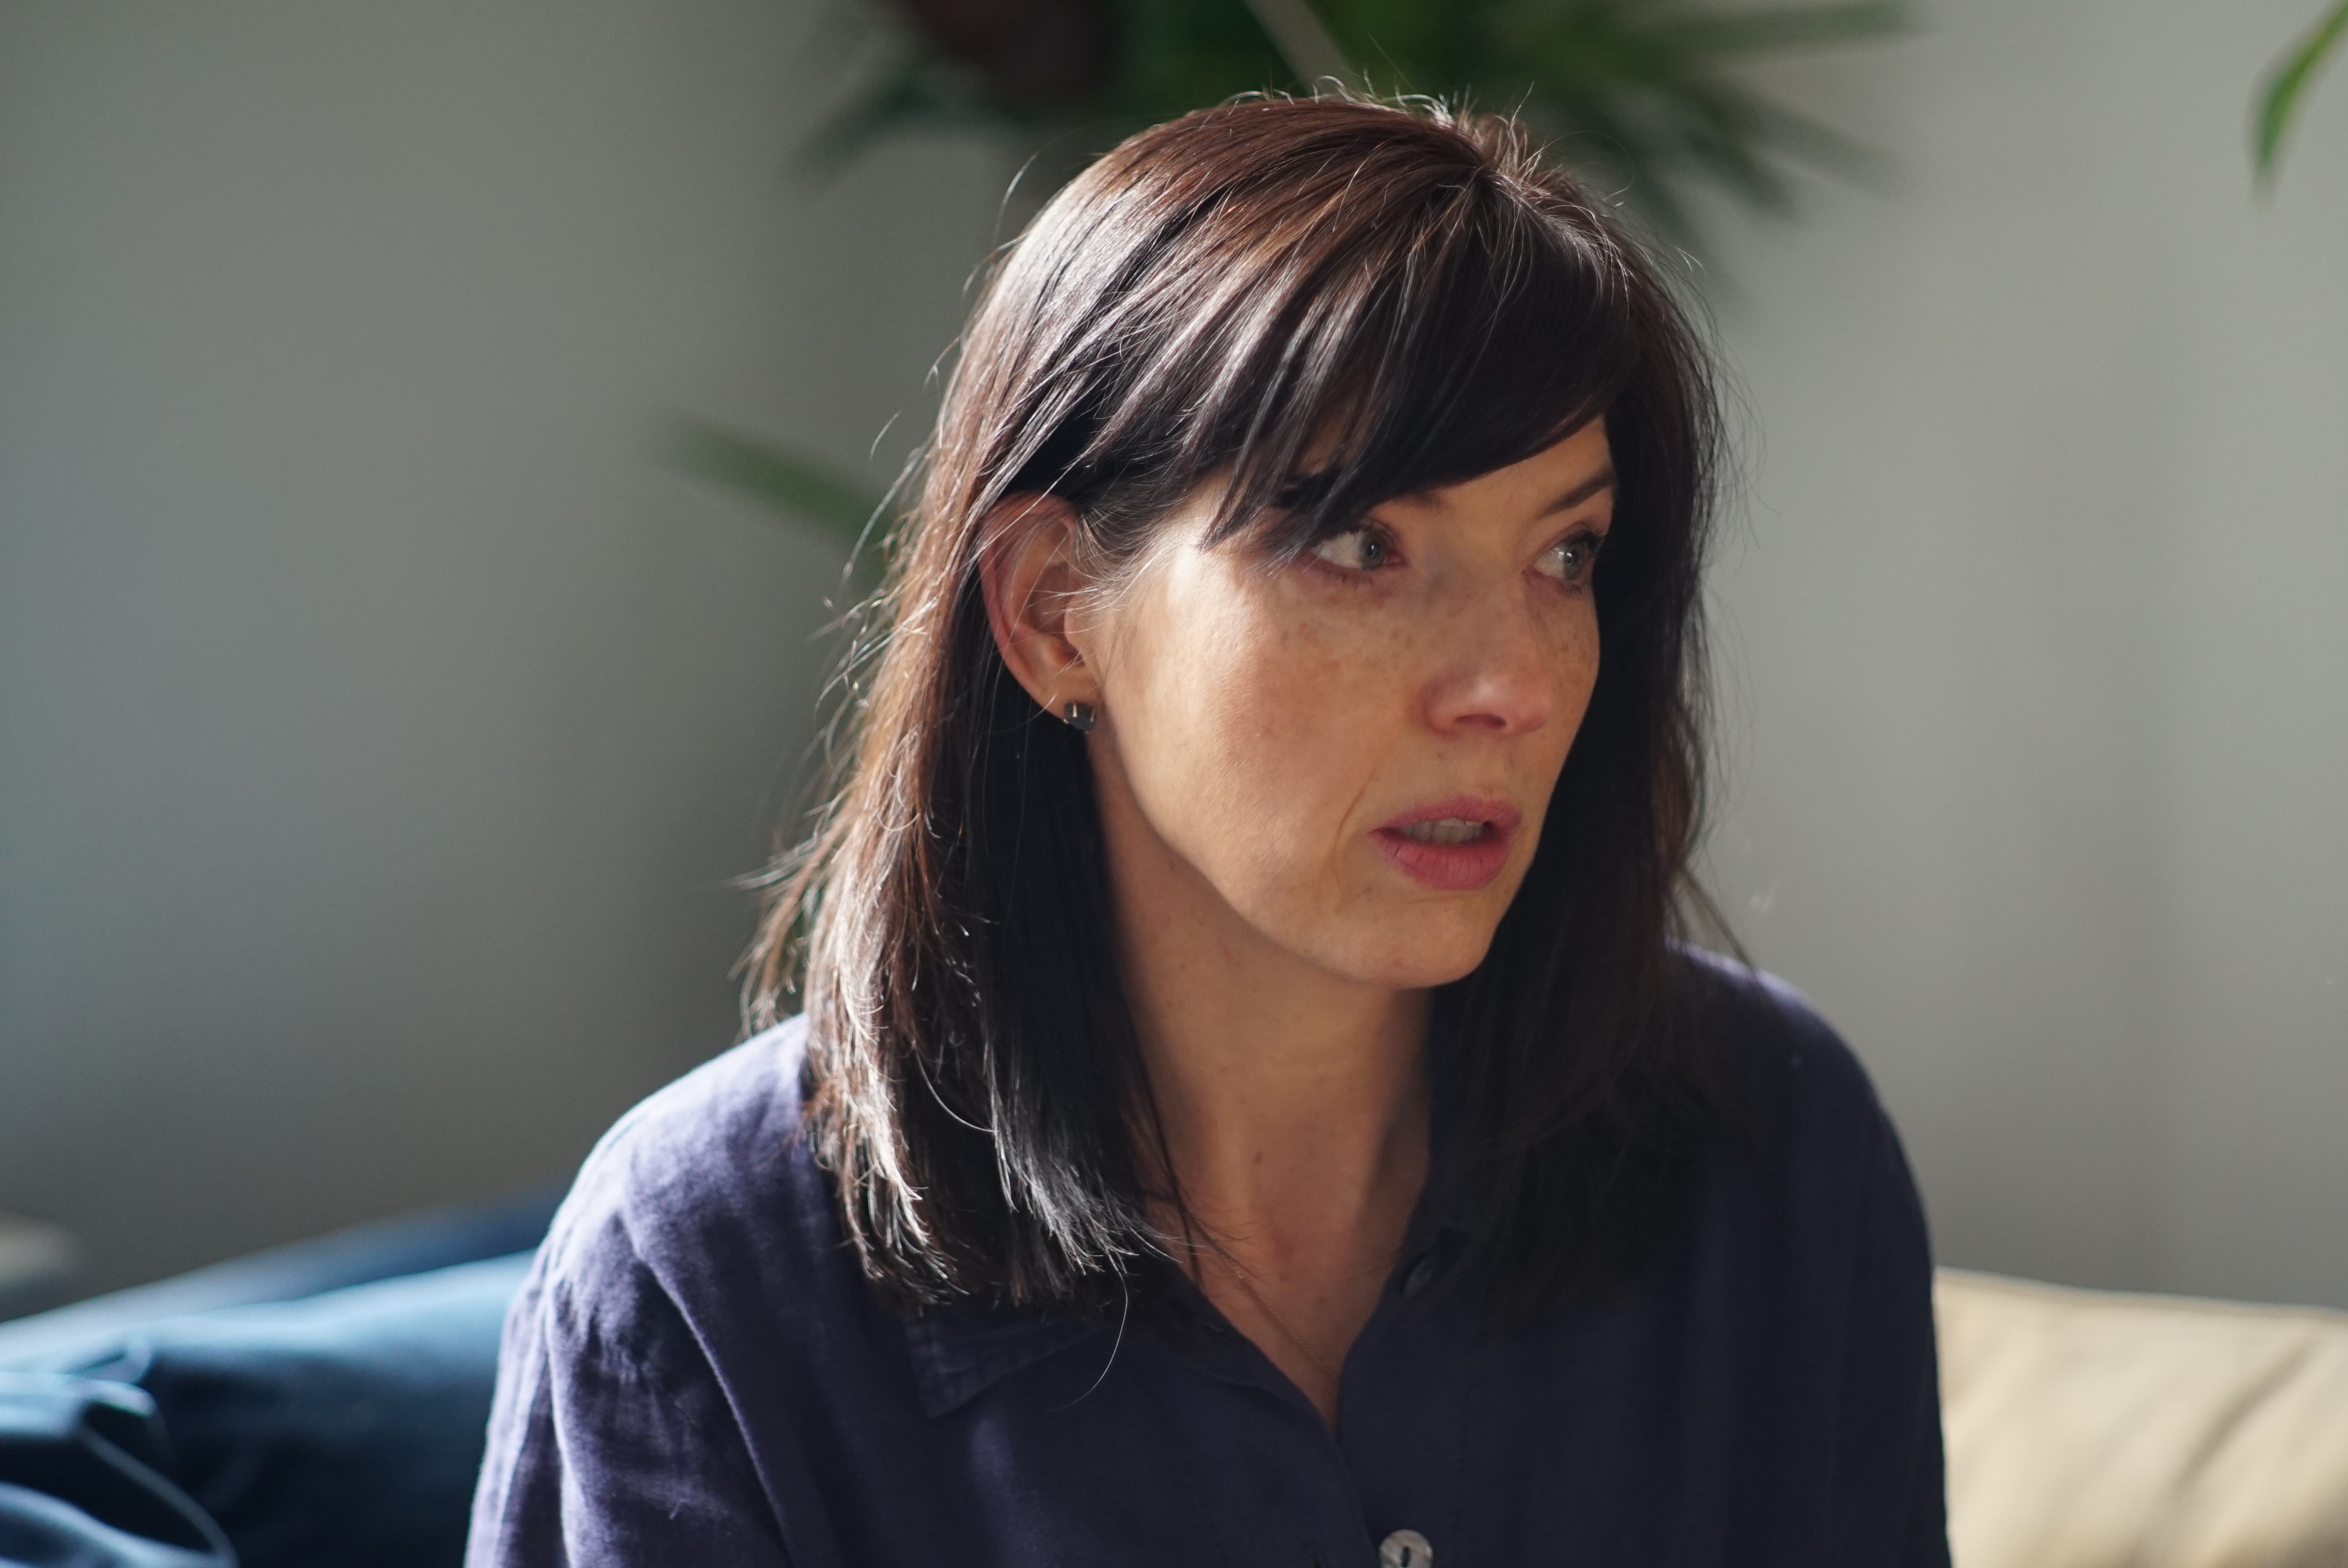 Photo of Annie MacDonell, a woman with dark hair wearing a dark blue shirt seated in a grey room; her gaze is directed off-camera to the right, her mouth slightly open as though about to speak